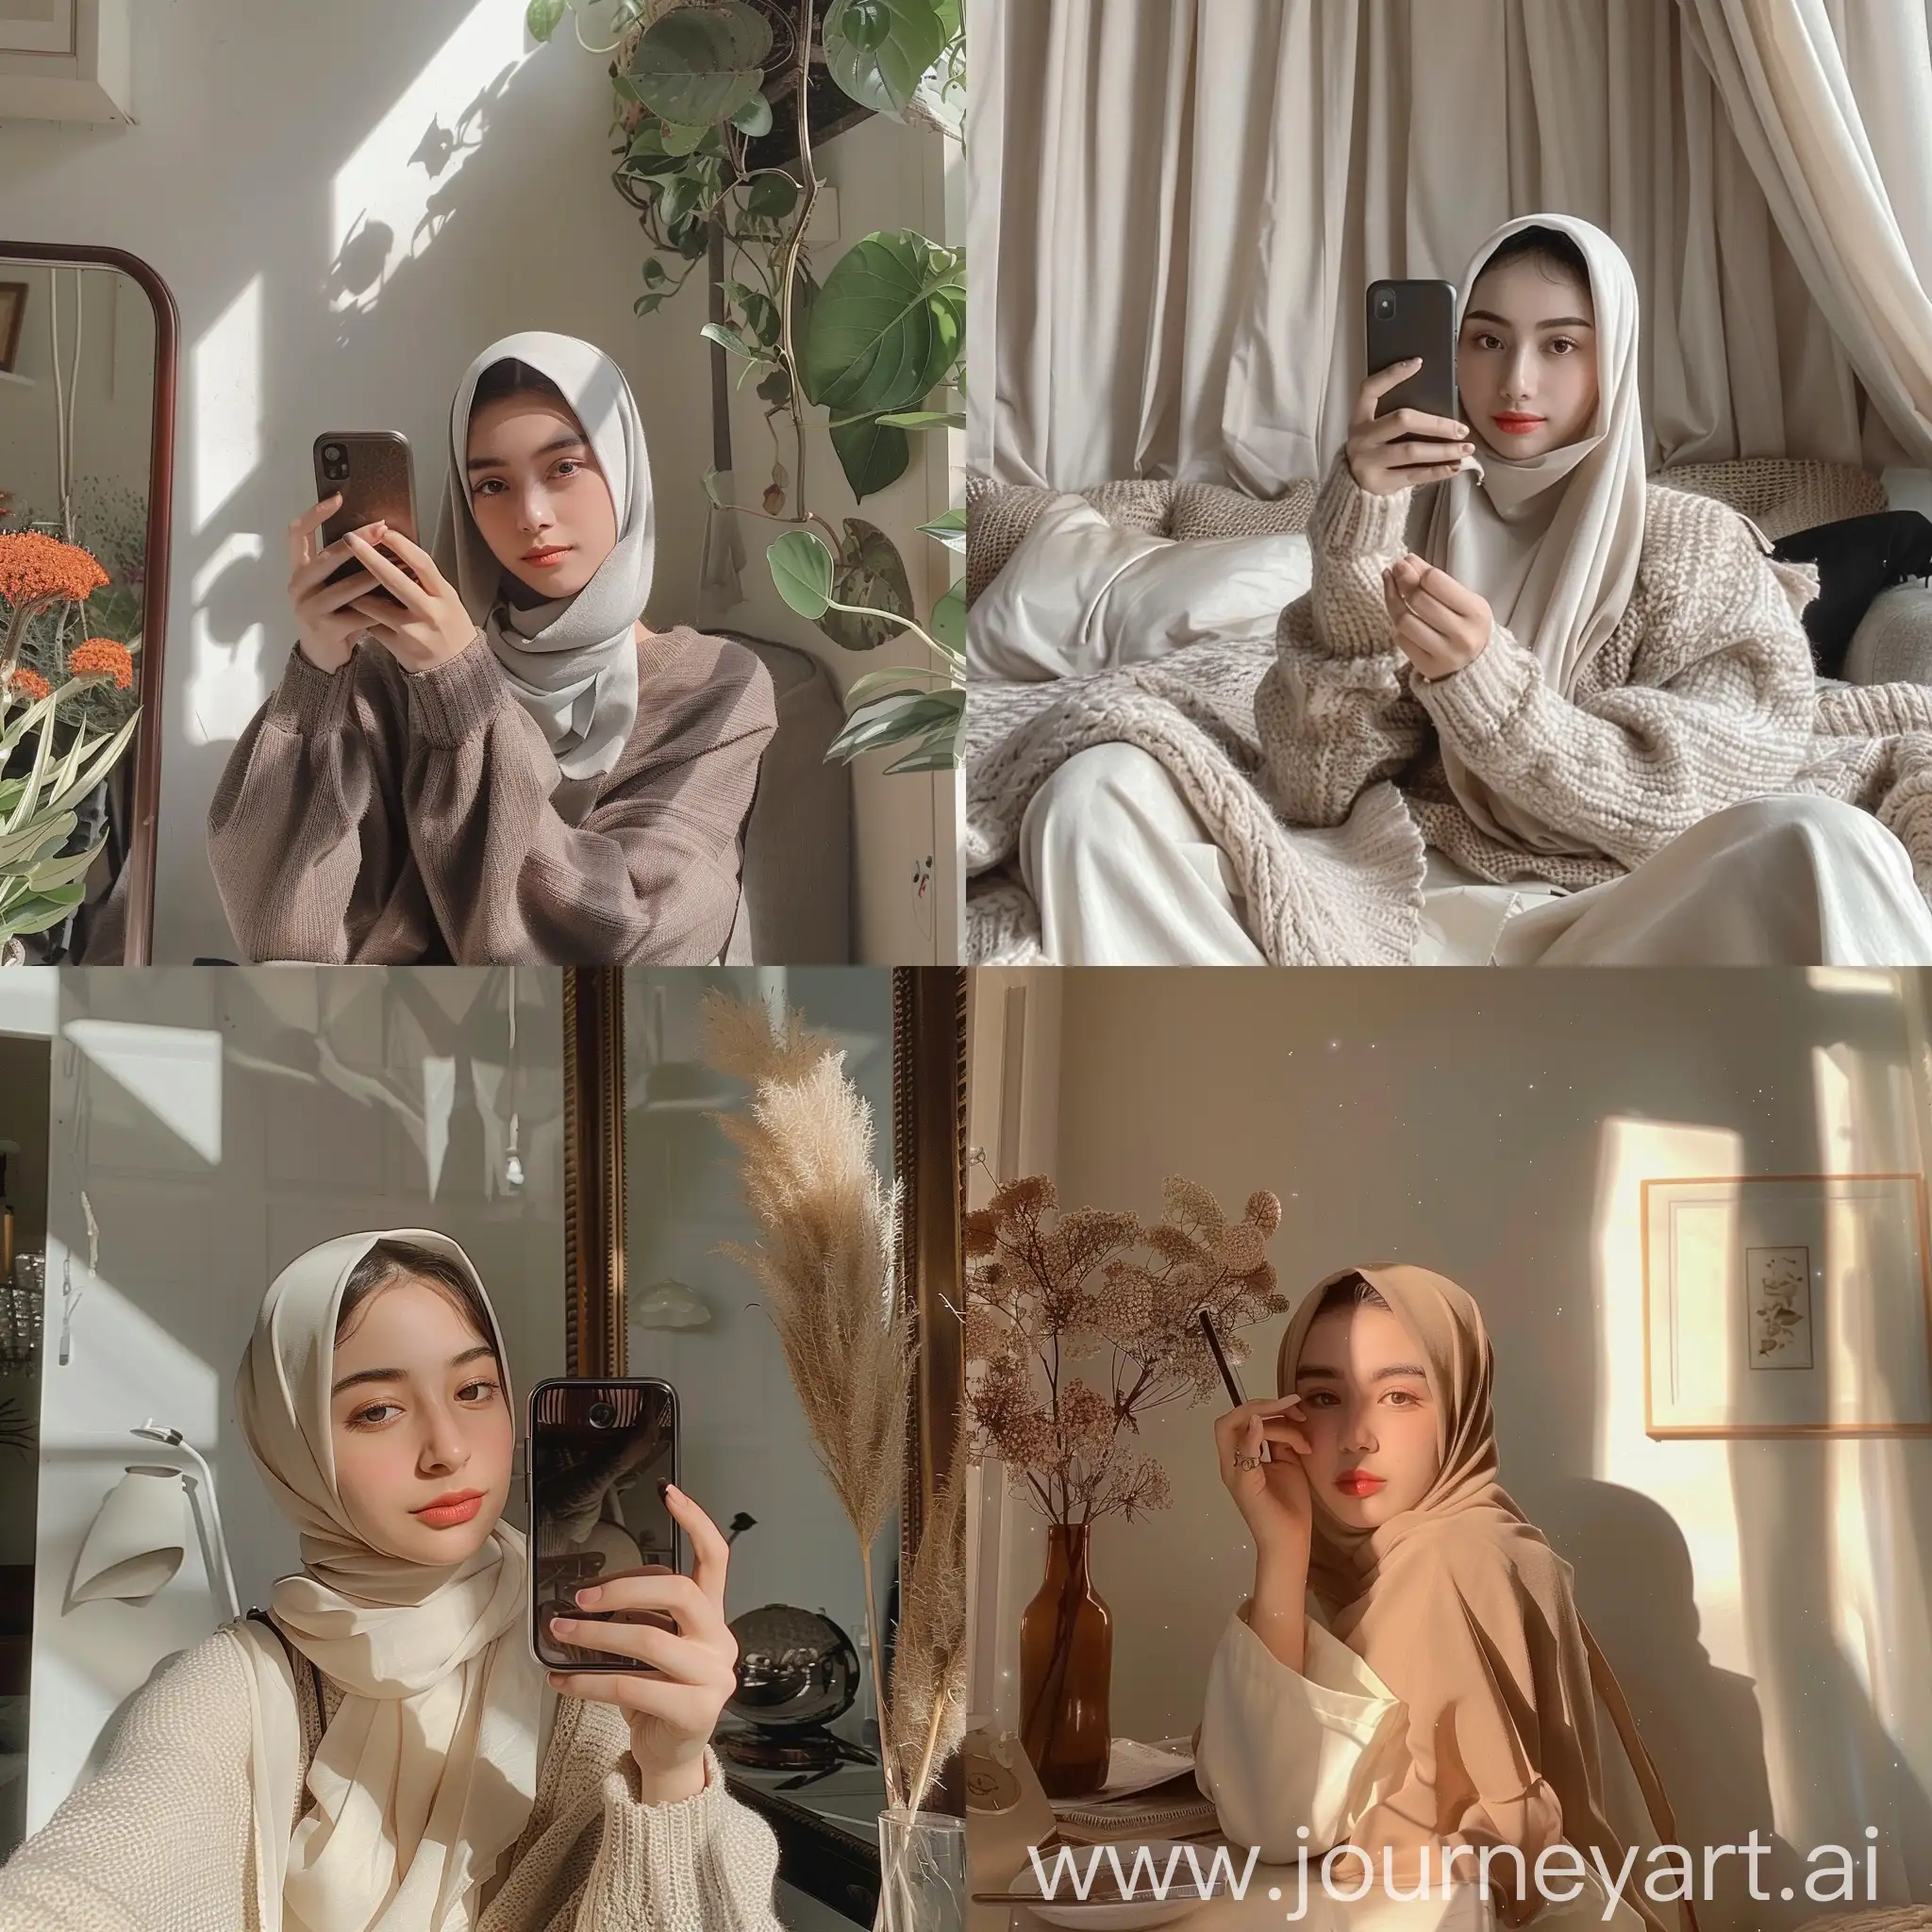 Beautiful-Girl-in-Hijab-Aesthetic-Instagram-Selfie-with-Decorative-Charm